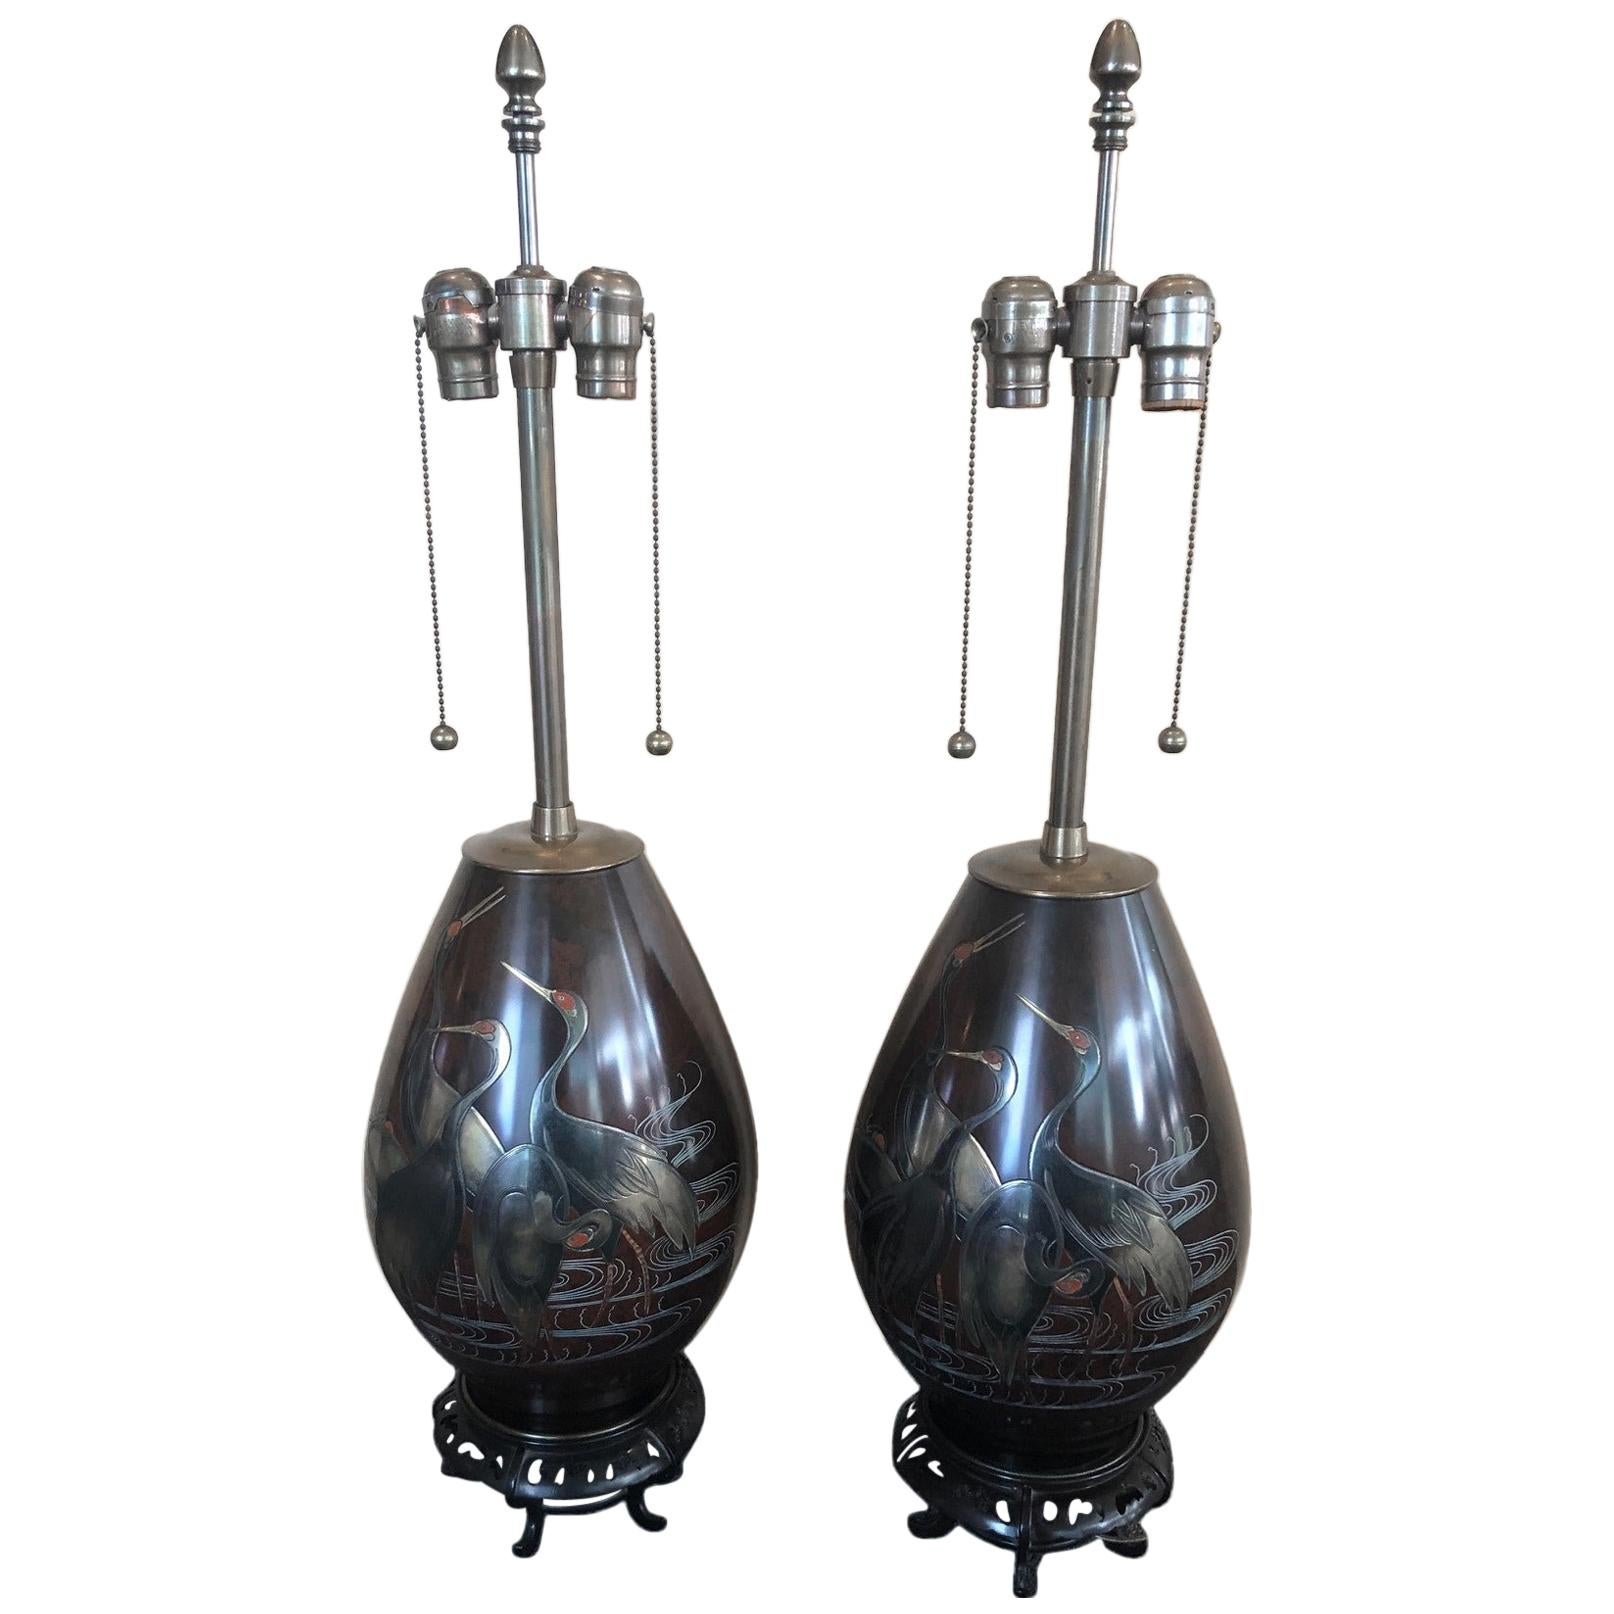 Pair of Japanese Mixed Metal Table Lamps by Marbro Lamp Company